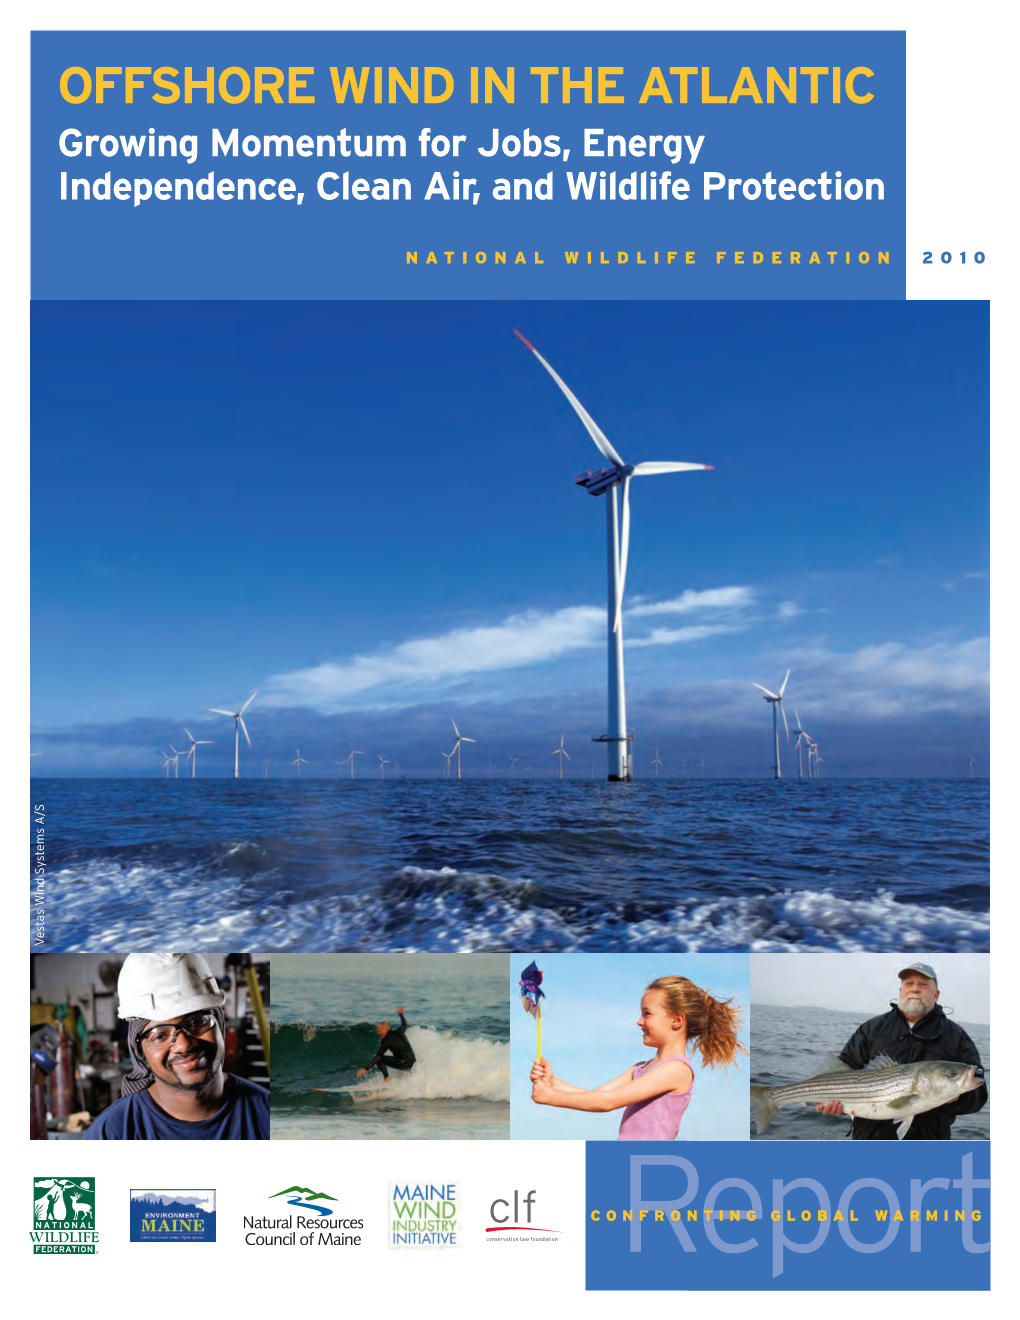 OFFSHORE WIND in the ATLANTIC Growing Momentum for Jobs, Energy Independence, Clean Air, and Wildlife Protection